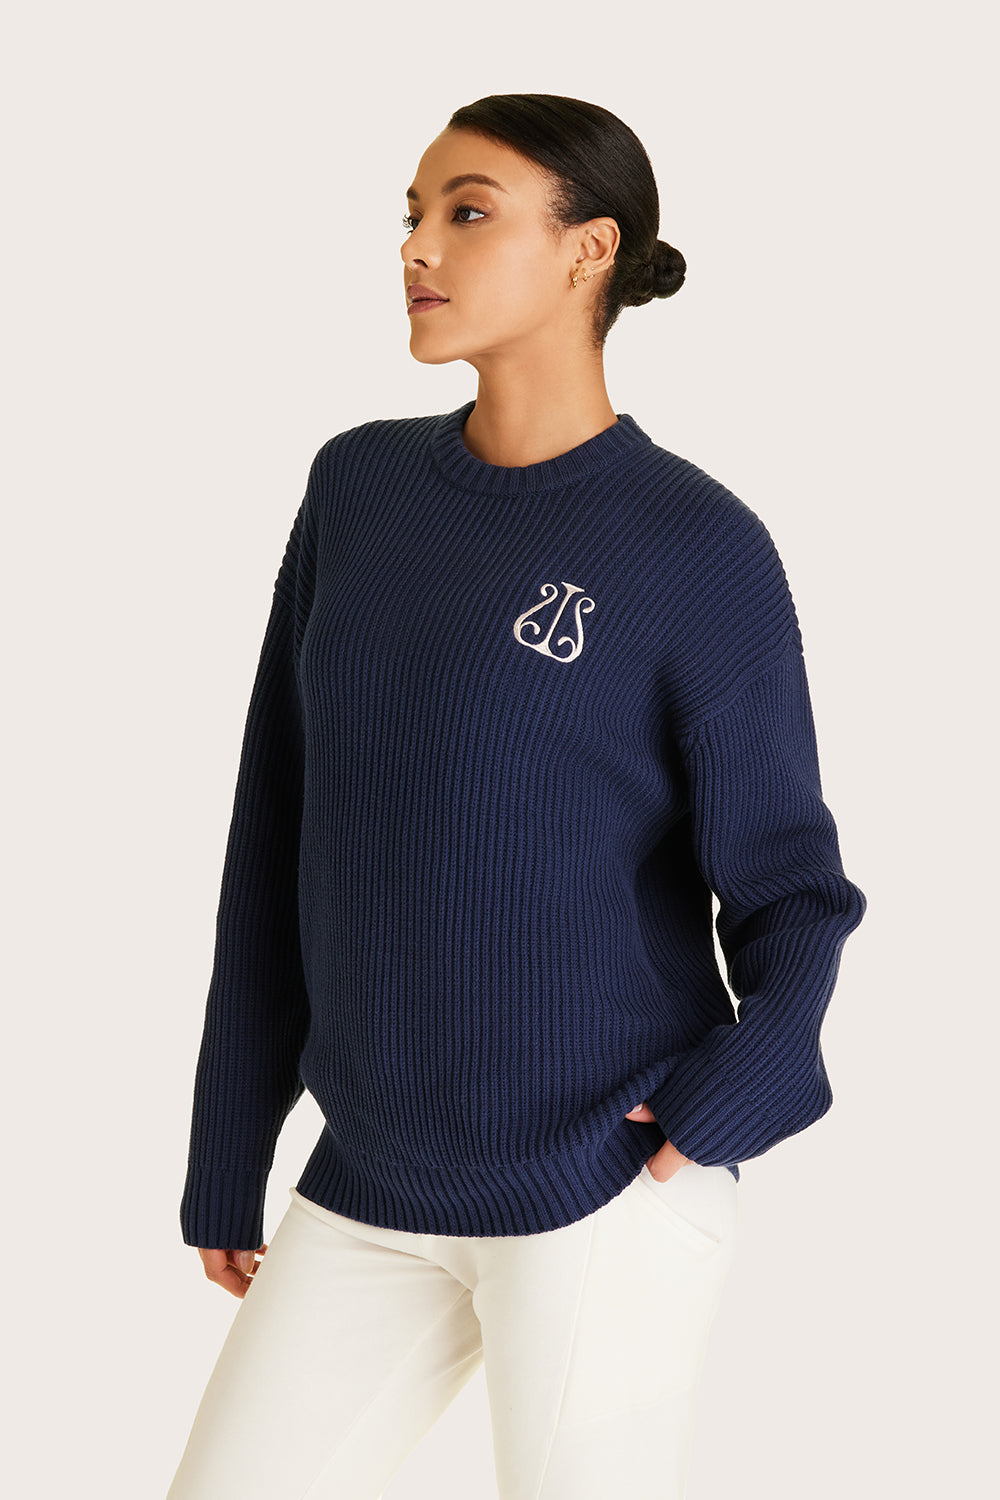 Alala women's navy knit sweater with white embroidered logo